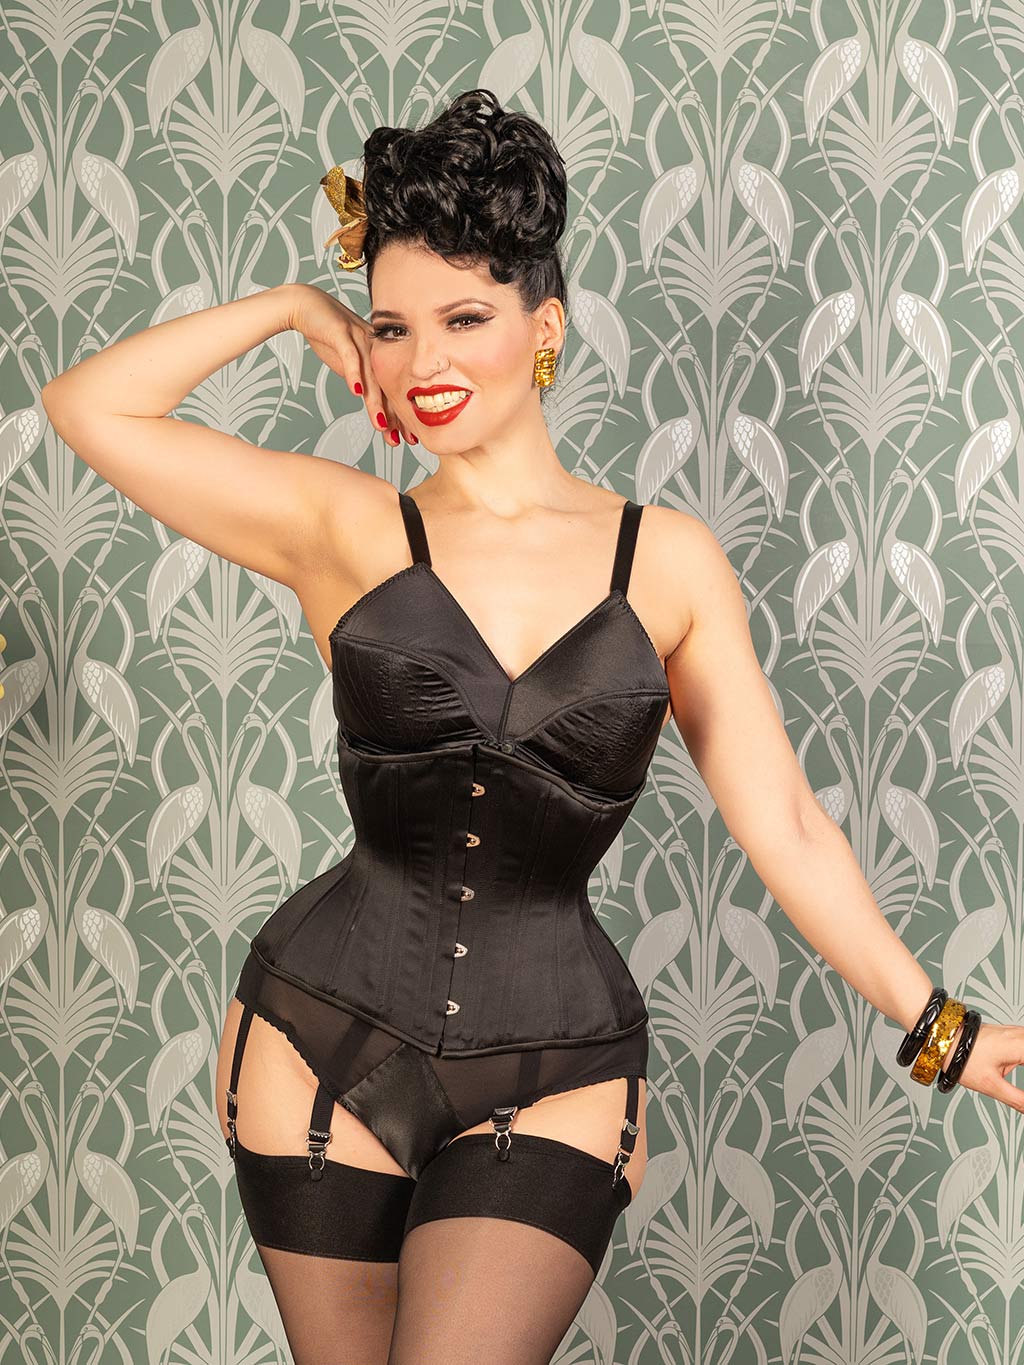 Corsets expertly designed for Waist Training or Fashion wear